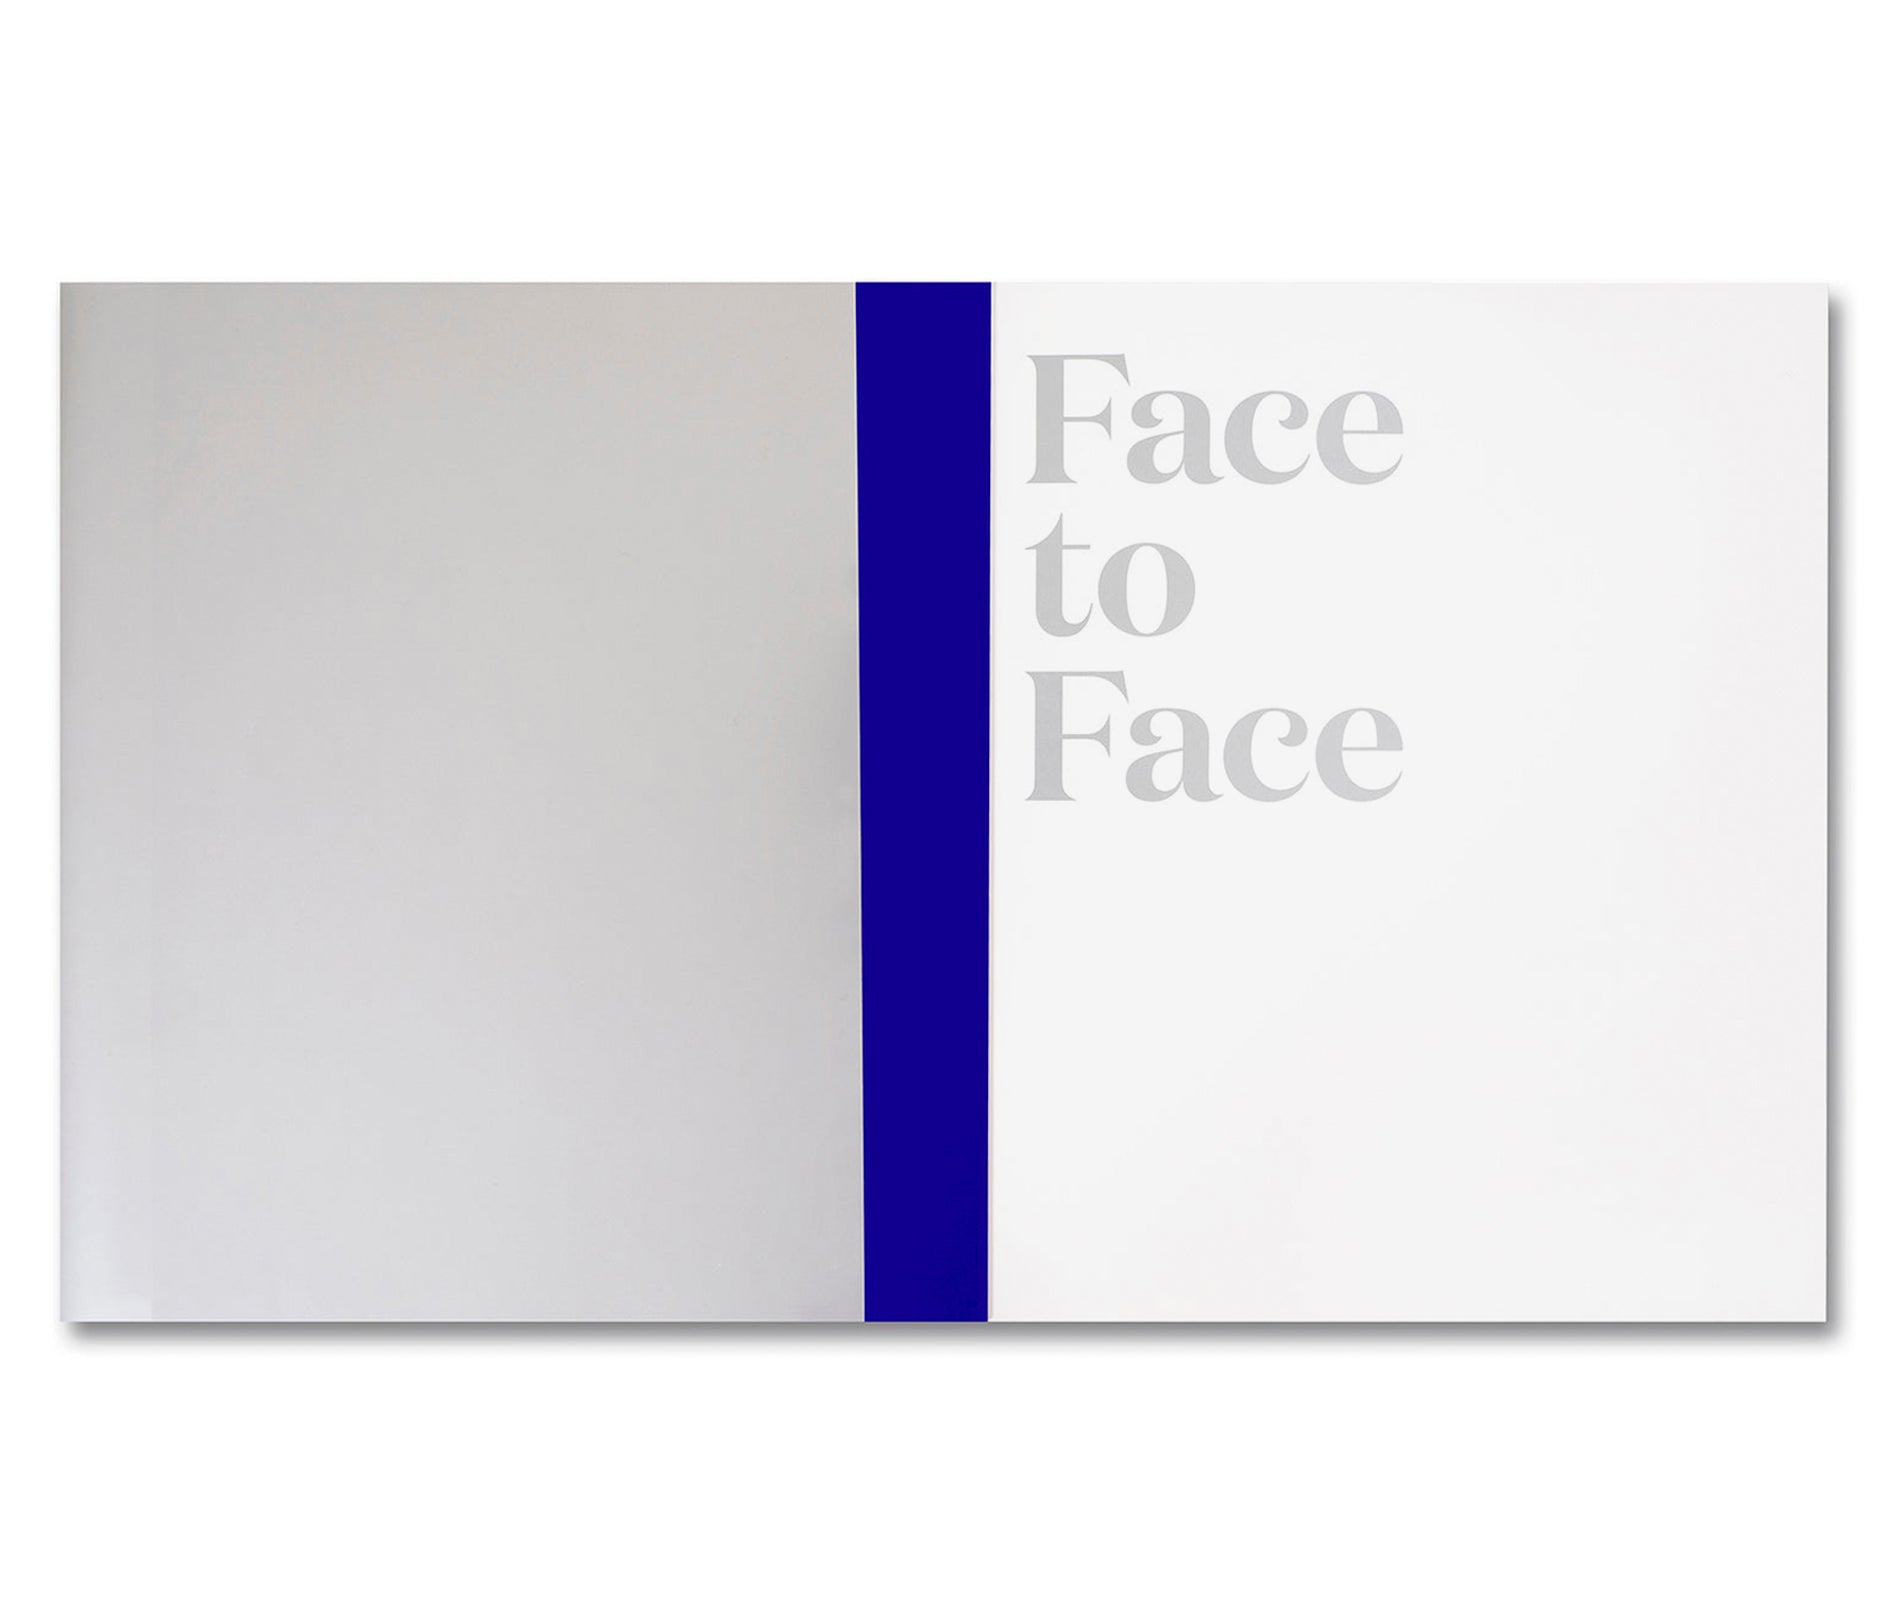 FACE TO FACE: PORTRAITS OF ARTISTS BY TACITA DEAN, BRIGITTE LACOMBE, AND CATHERINE OPIE by Tacita Dean, Brigitte Lacombe, Catherine Opie